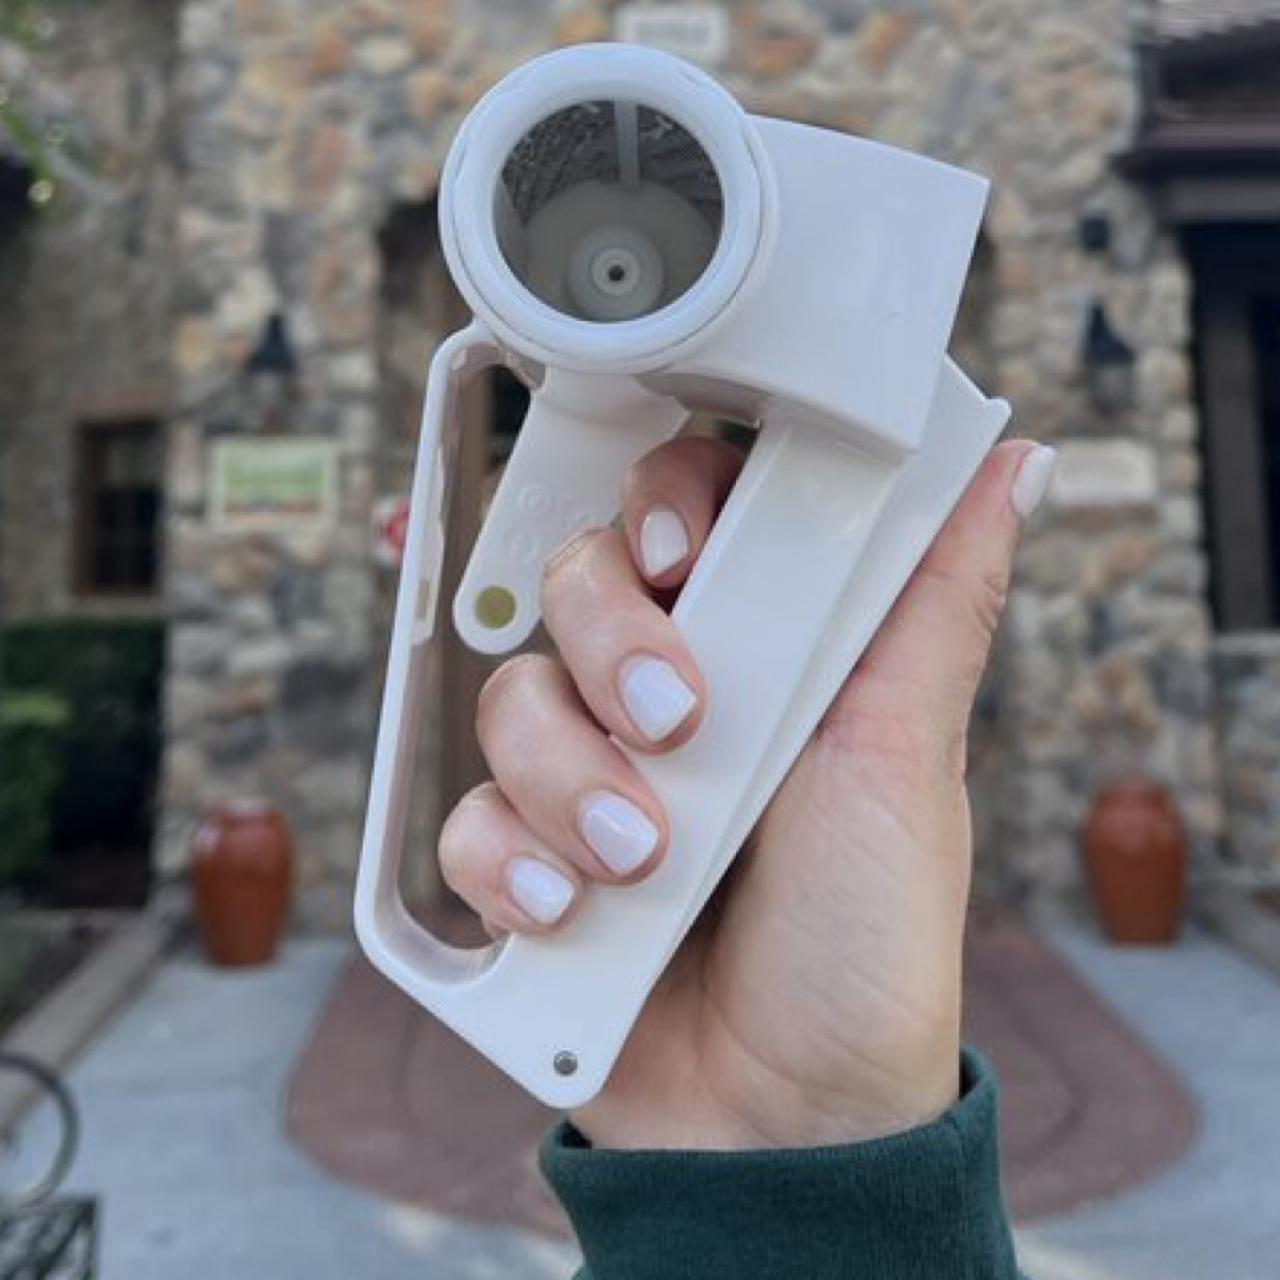 People just found out you can buy Olive Garden cheese graters